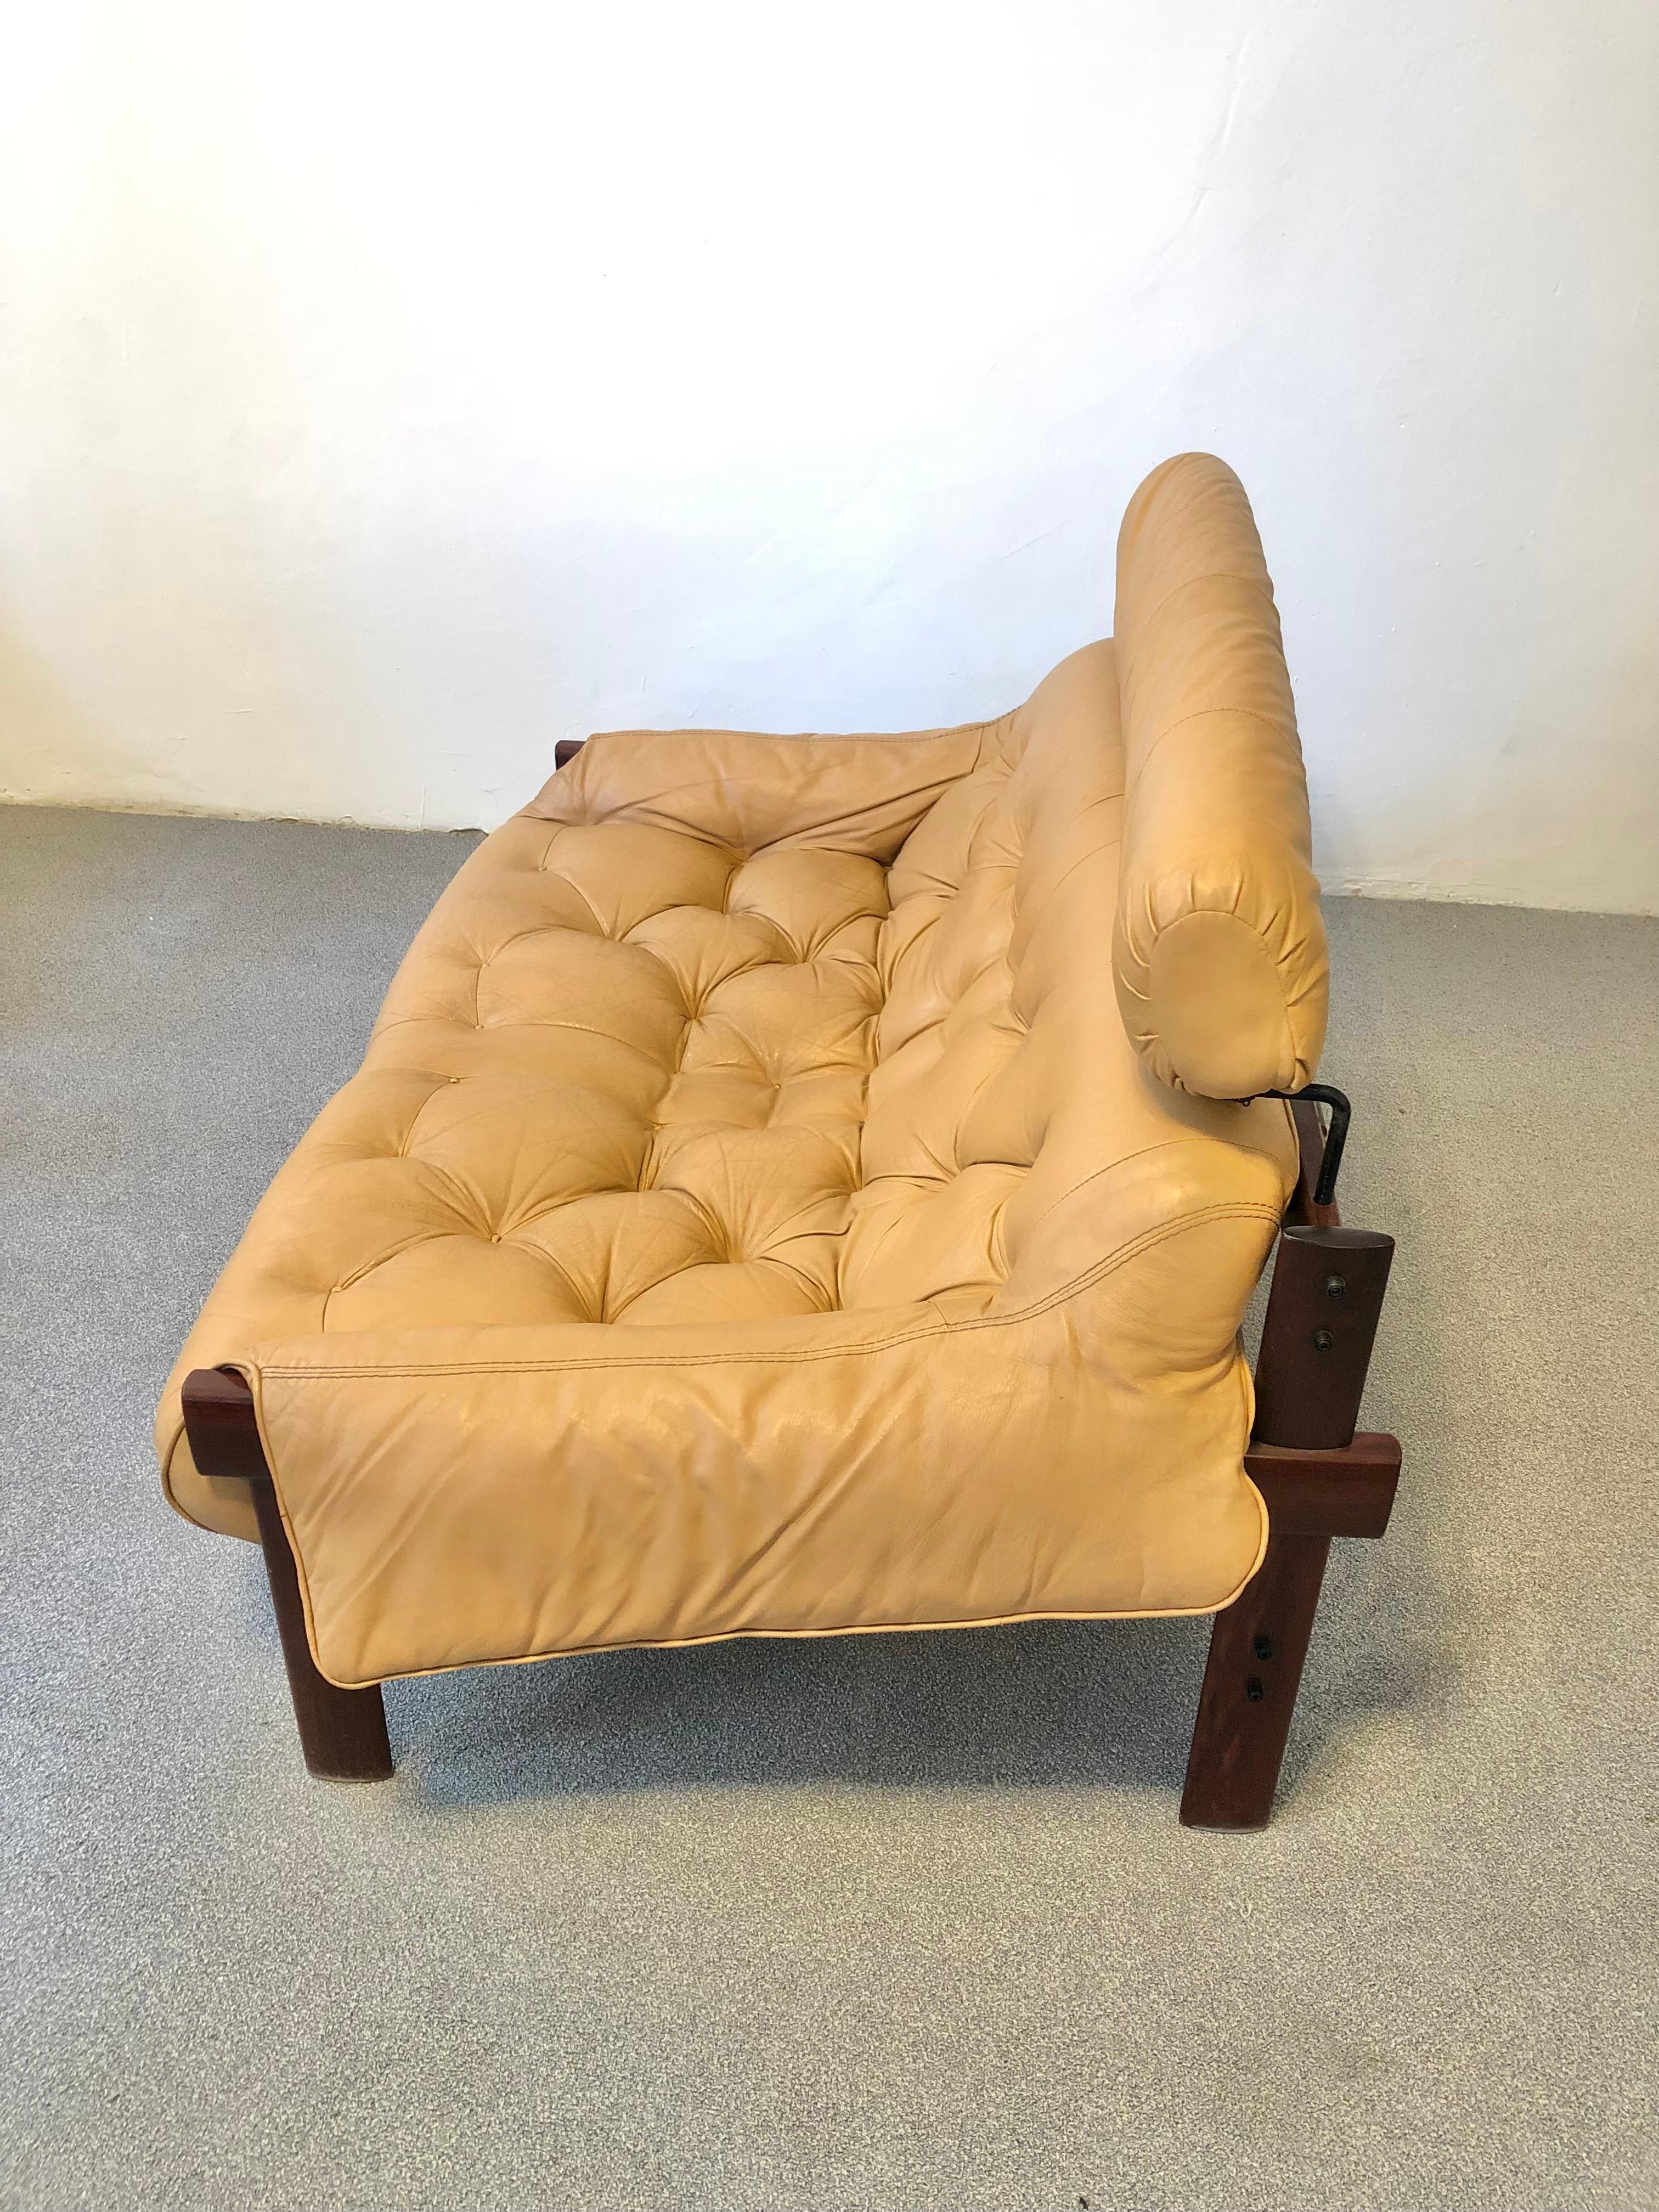 Stunning Loveseat with solid jatobah frame and original leather upholstery, designed by Percival Lafer and manufactured by Lafer Furniture, Brazil, during the 1970s. Light wear and patina consistent with age and use.